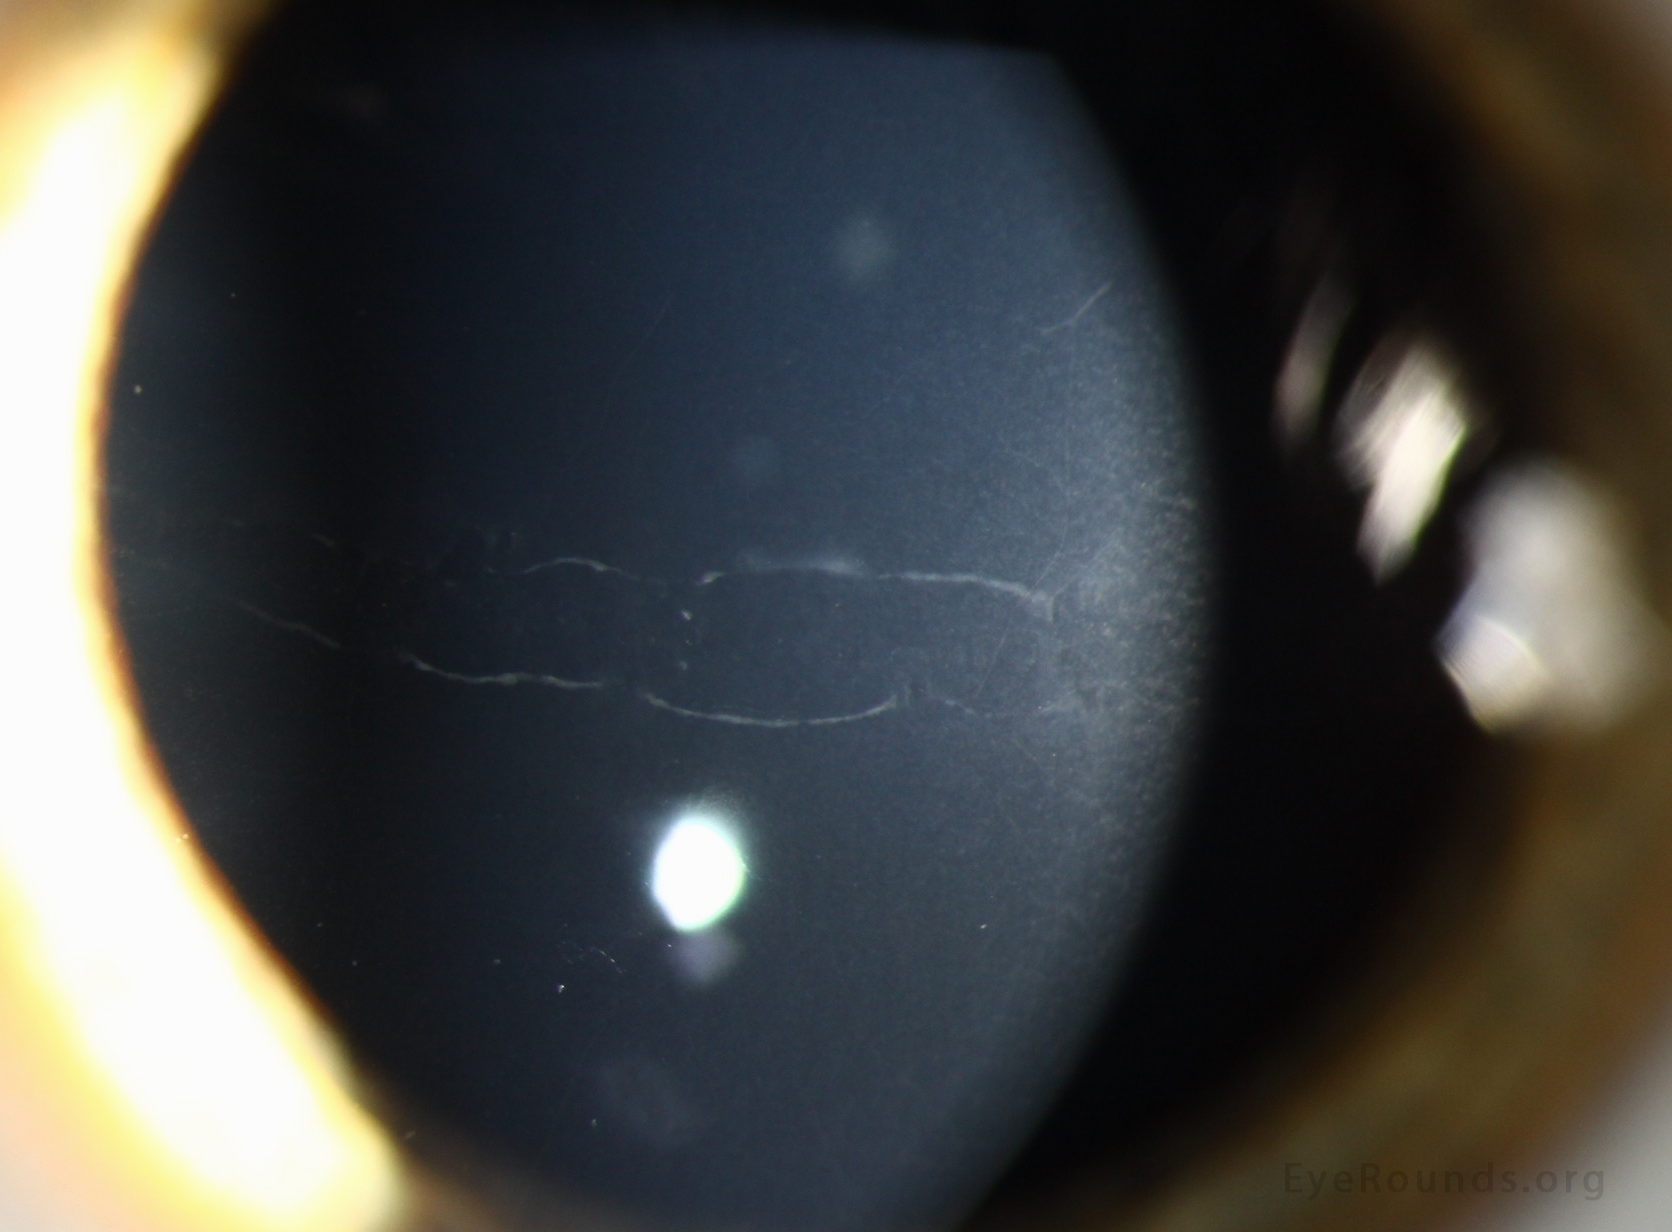 Band lesions, sometimes called 'snail tracks,' are classically horizontal lesions with parallel, scalloped, non-tapering edges at the level of the posterior cornea